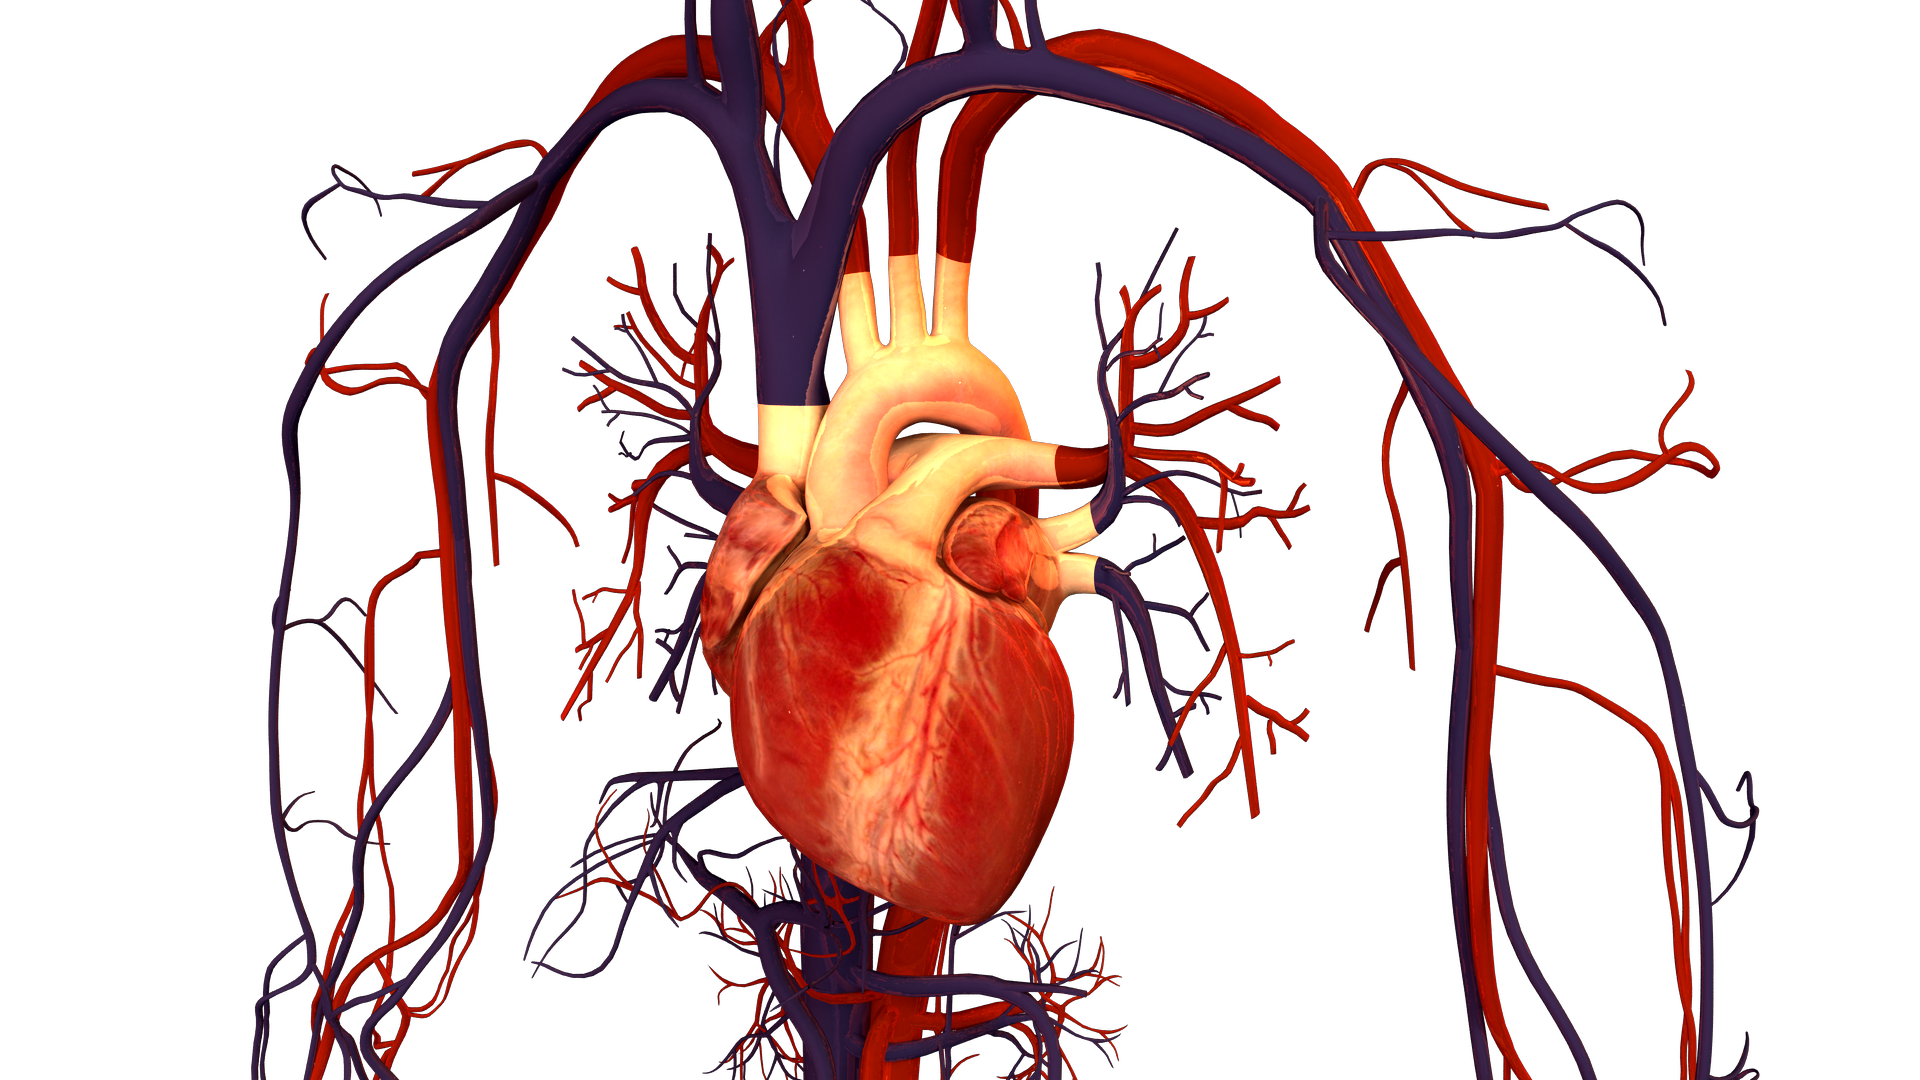 File:Human Heart and Circulatory System.png - Wikimedia Commons